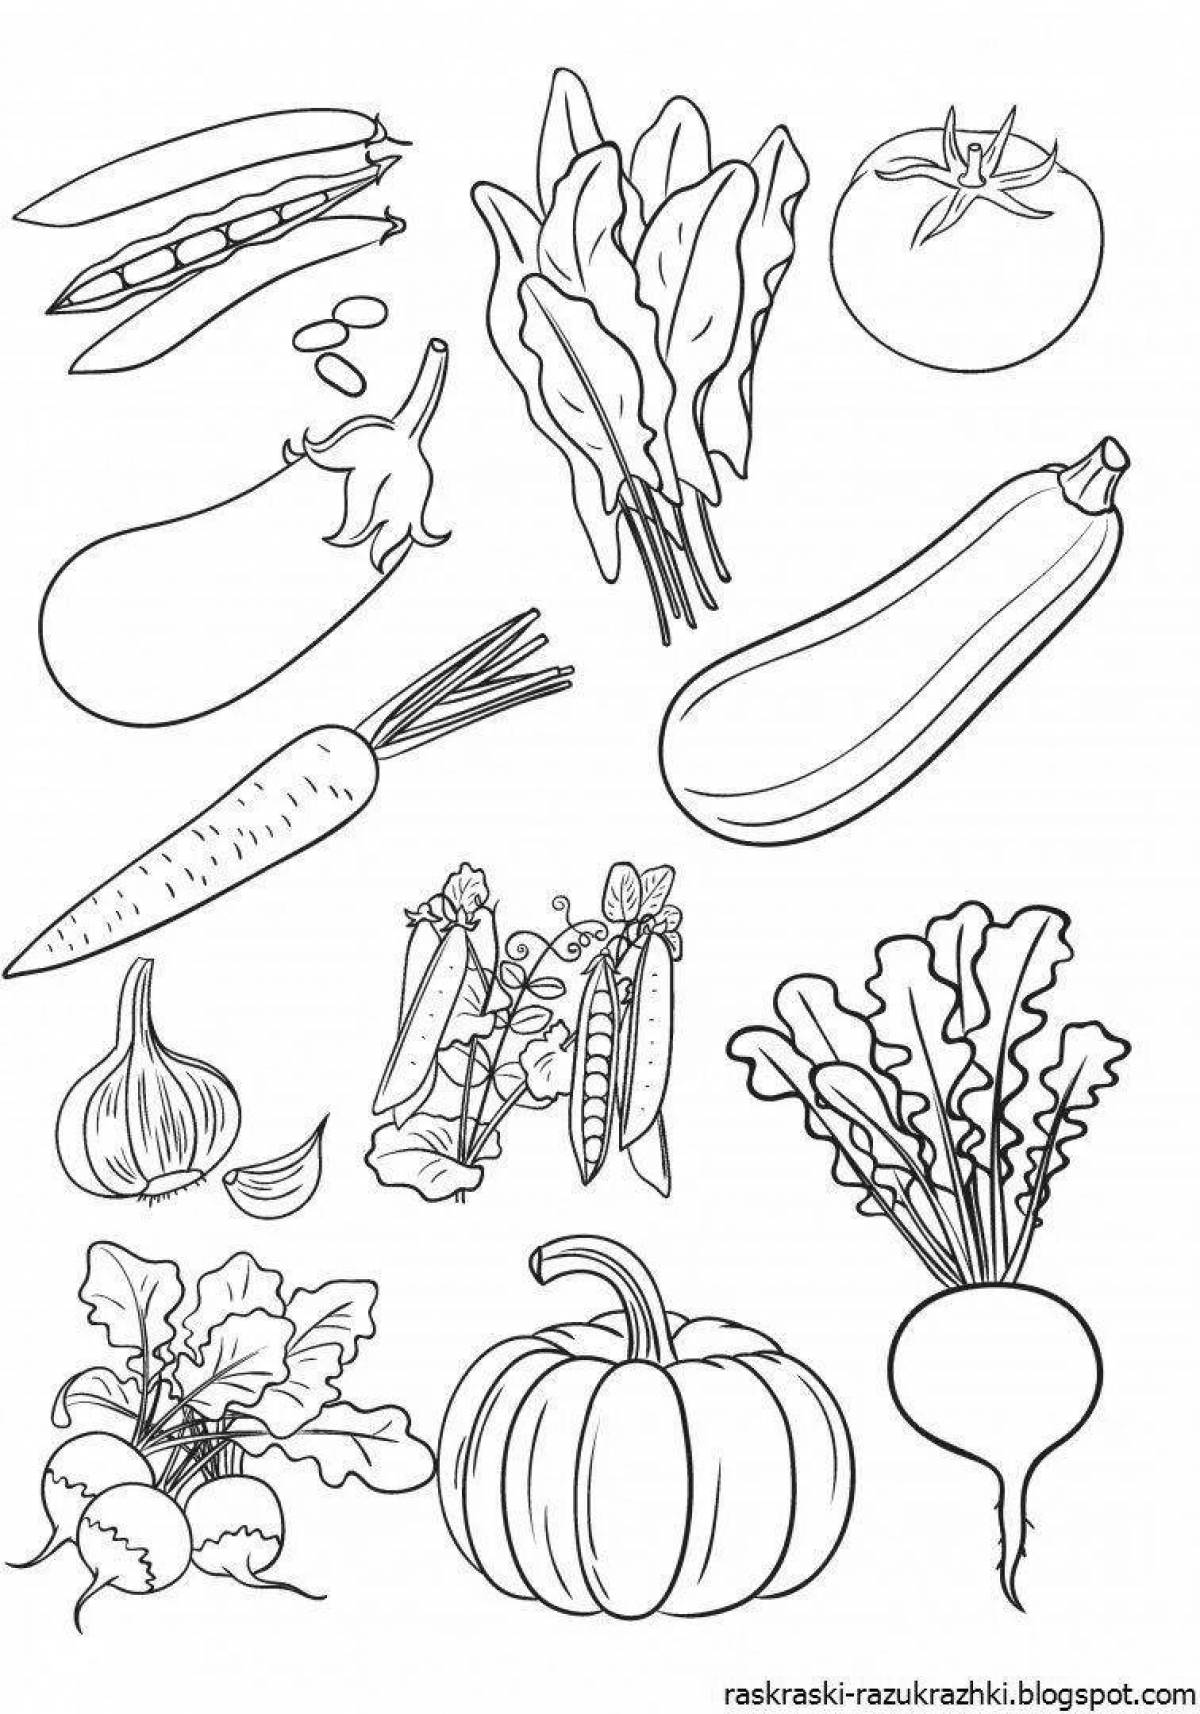 Vibrant vegetable coloring book for 3-4 year olds